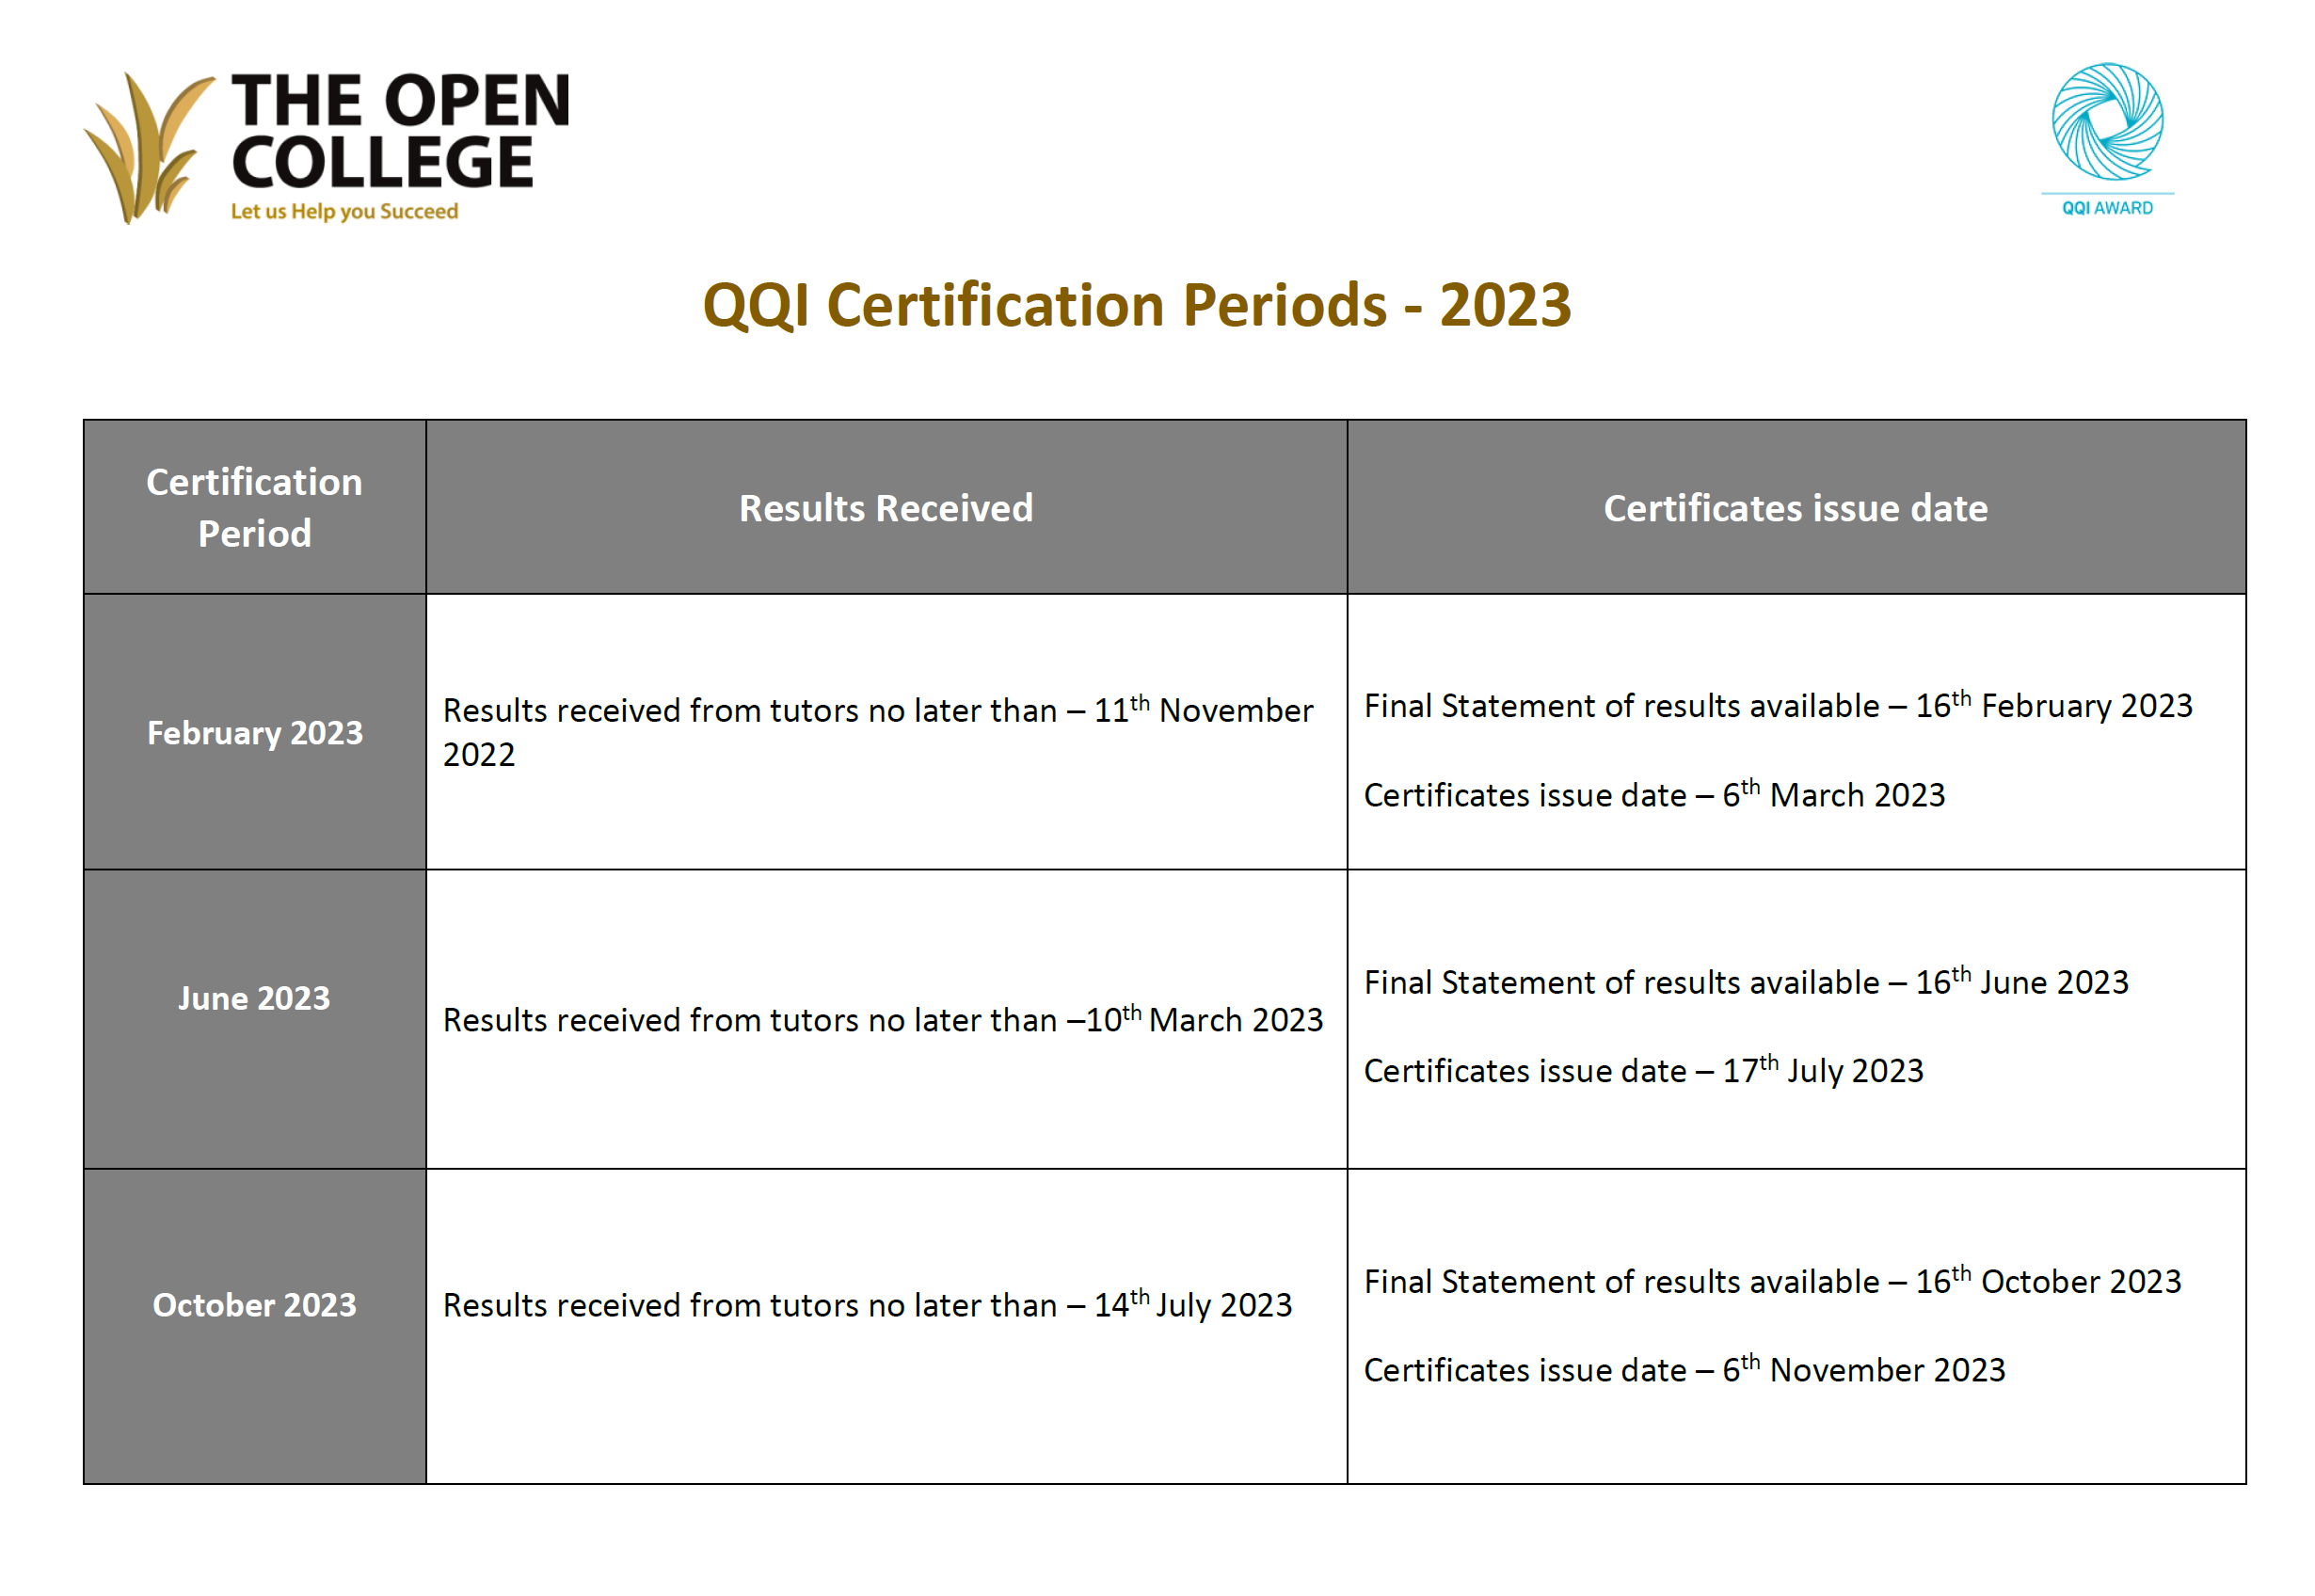 Certification Periods 2023 